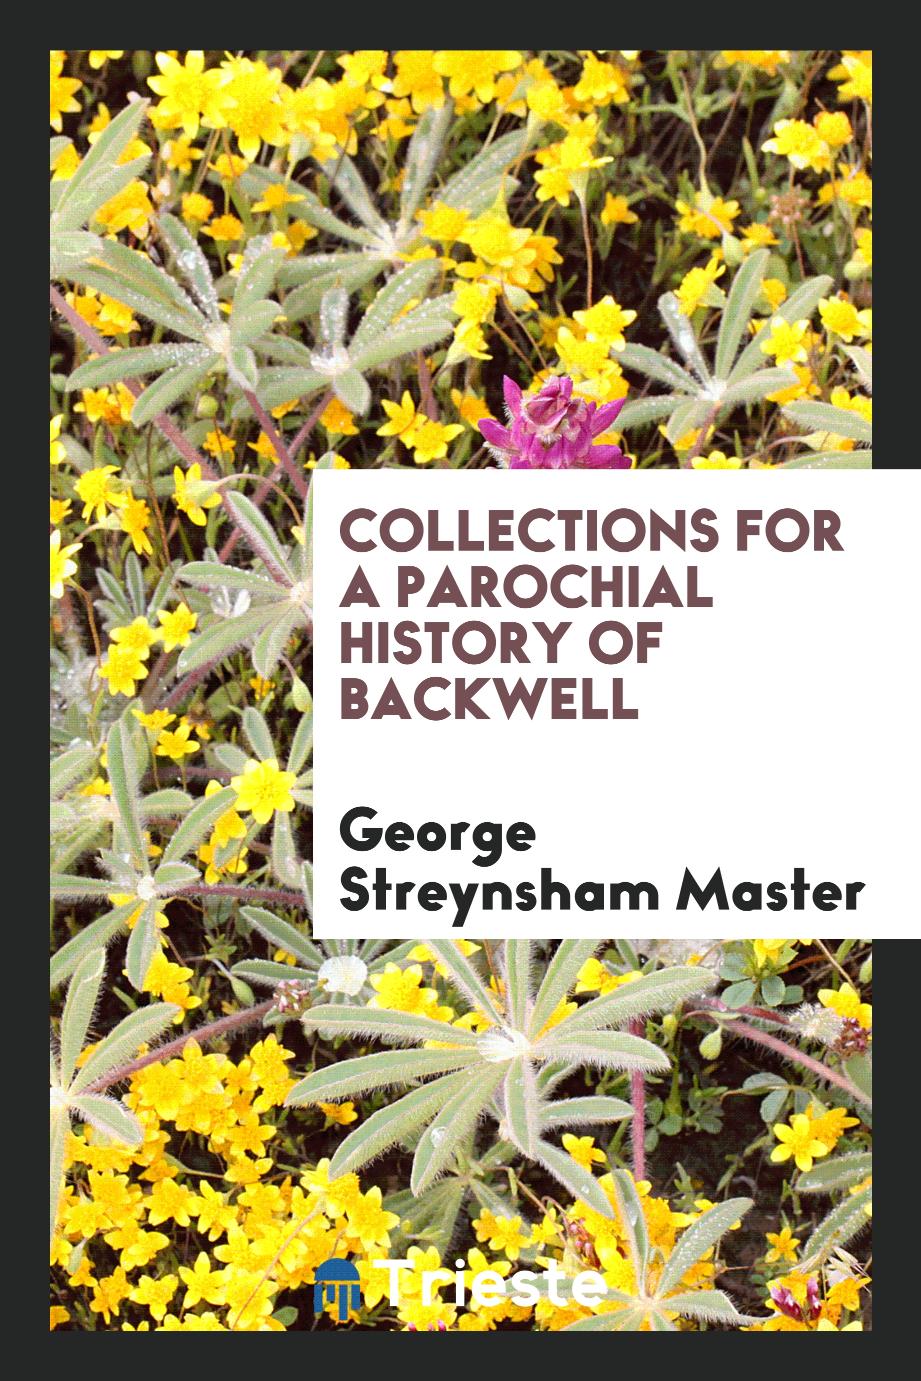 Collections for a parochial history of Backwell